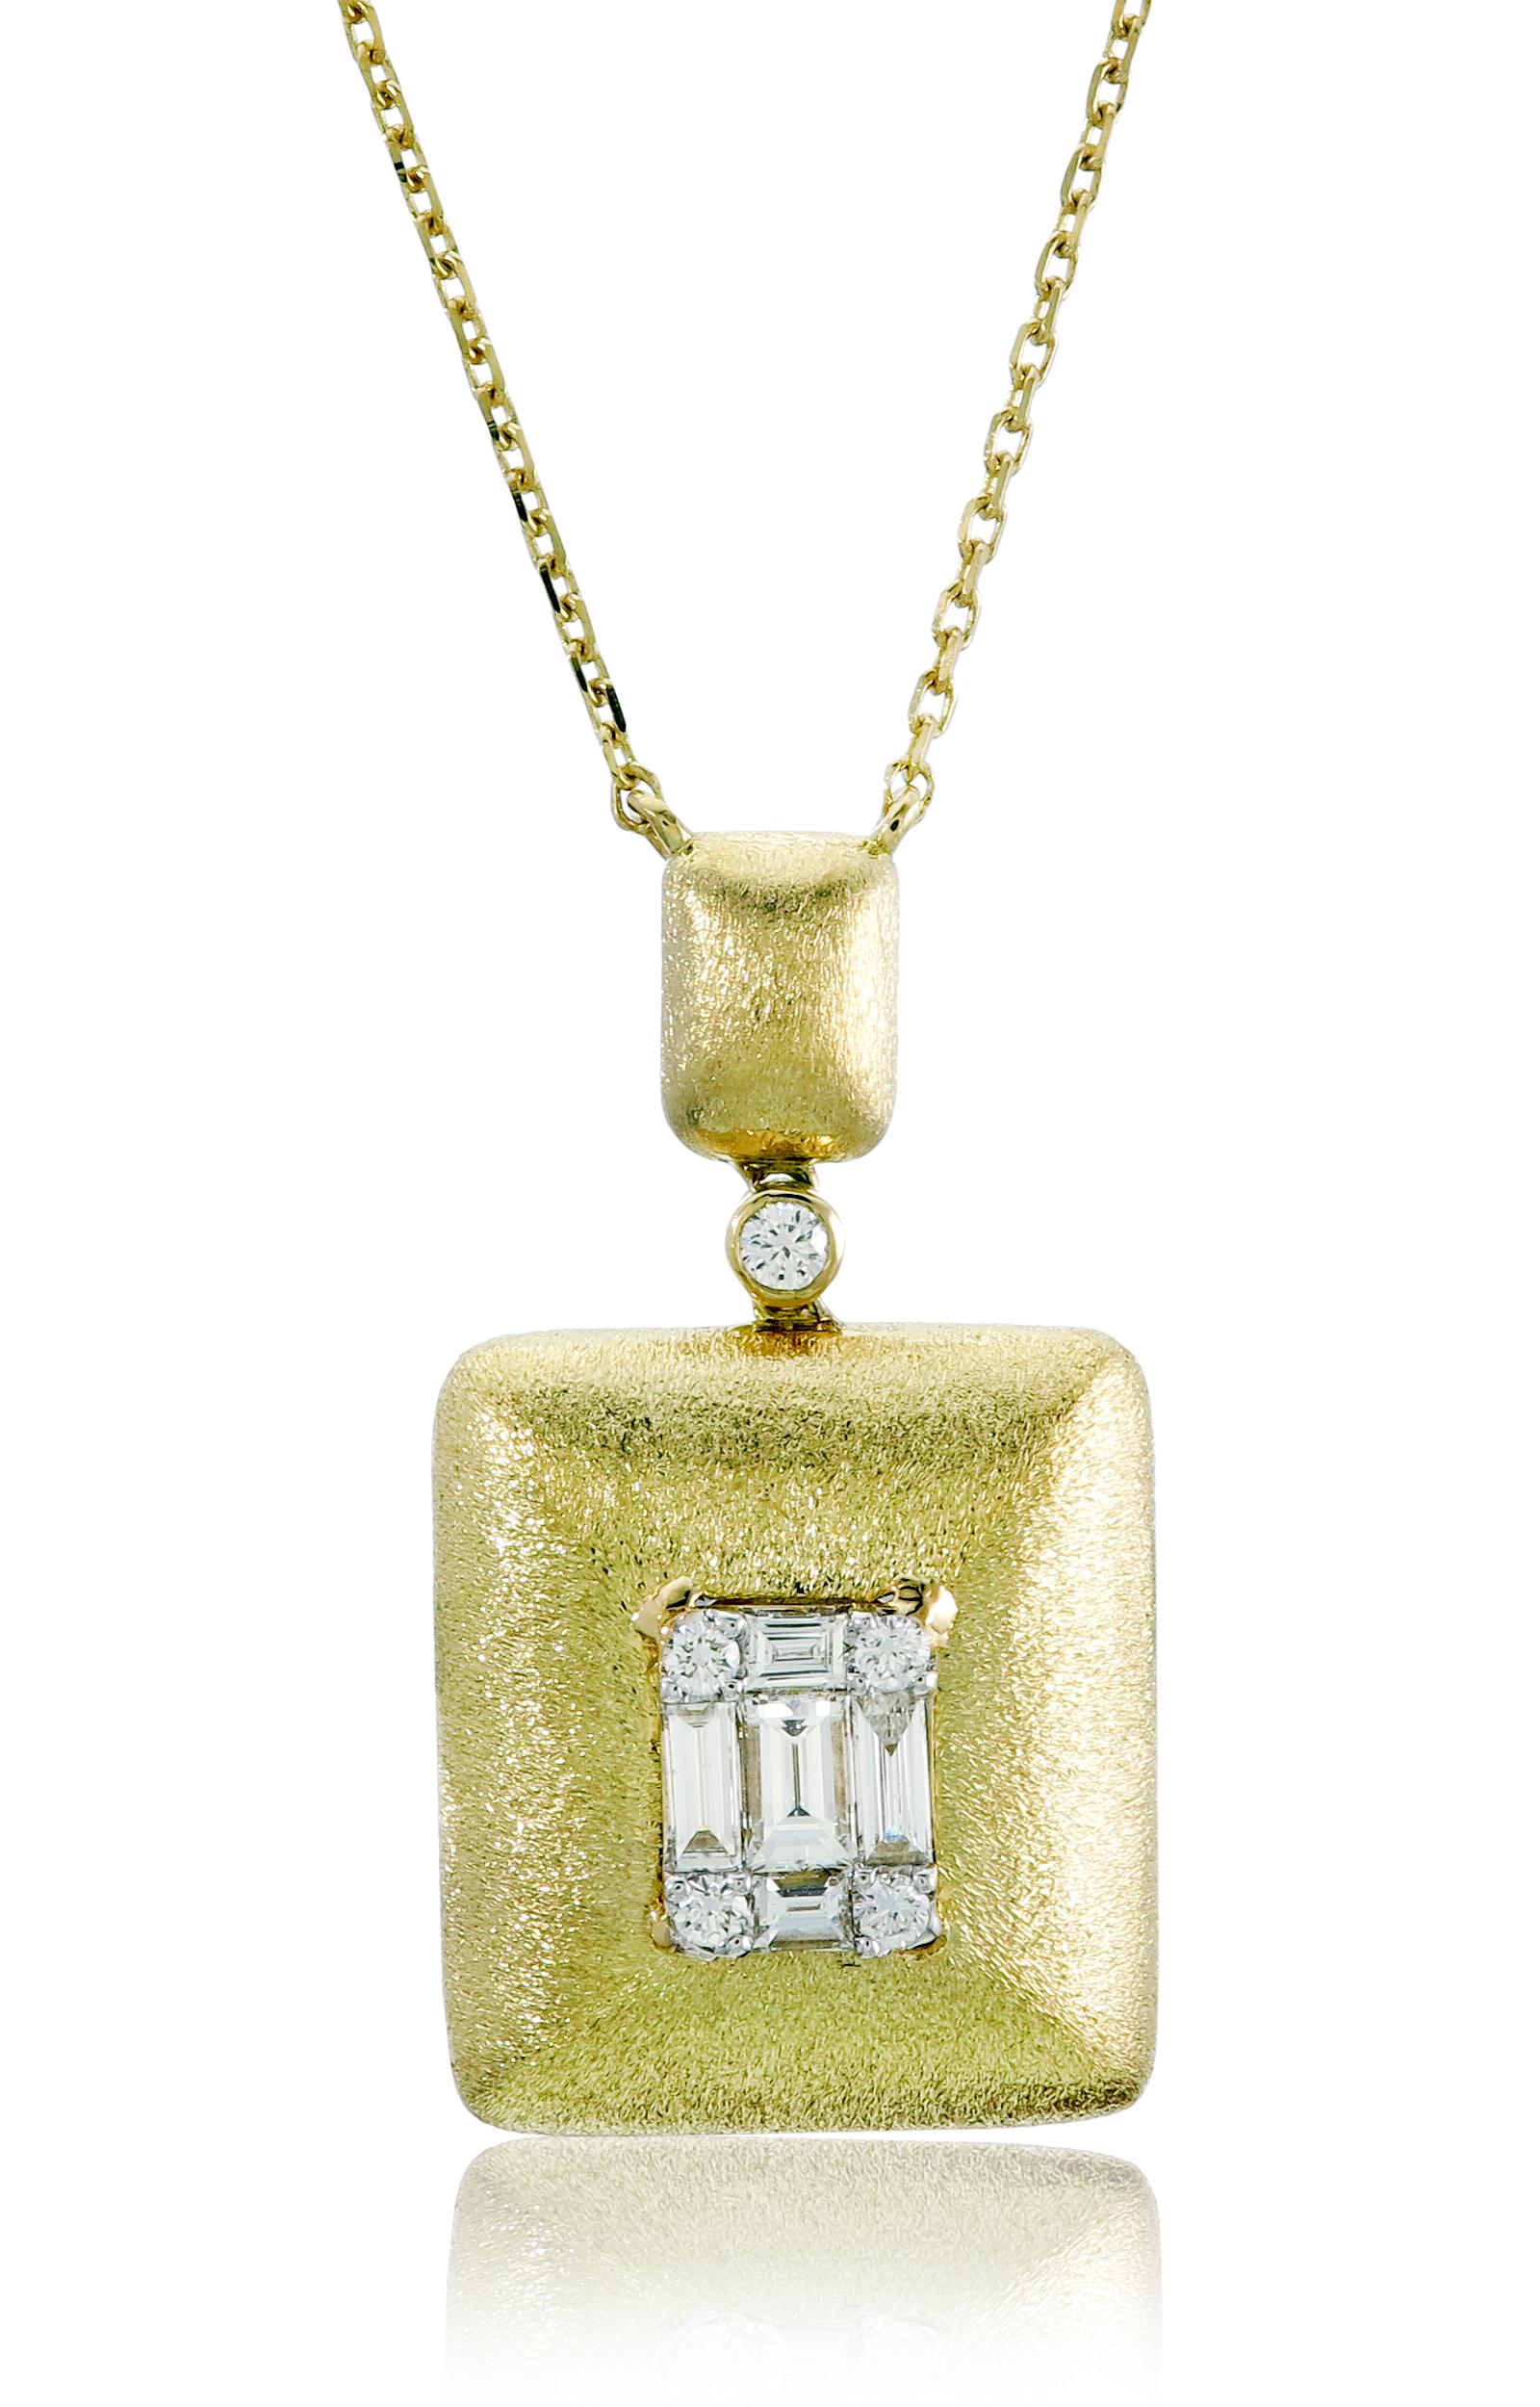 This 18K Yellow Gold cocktail Pendant Necklace features a luscious Emerald shape White Diamond appx. 1.25 cts Illusion. Each diamond hand-selected by our experts for its superior luster and surface quality. Combine with glamorous outfits for a